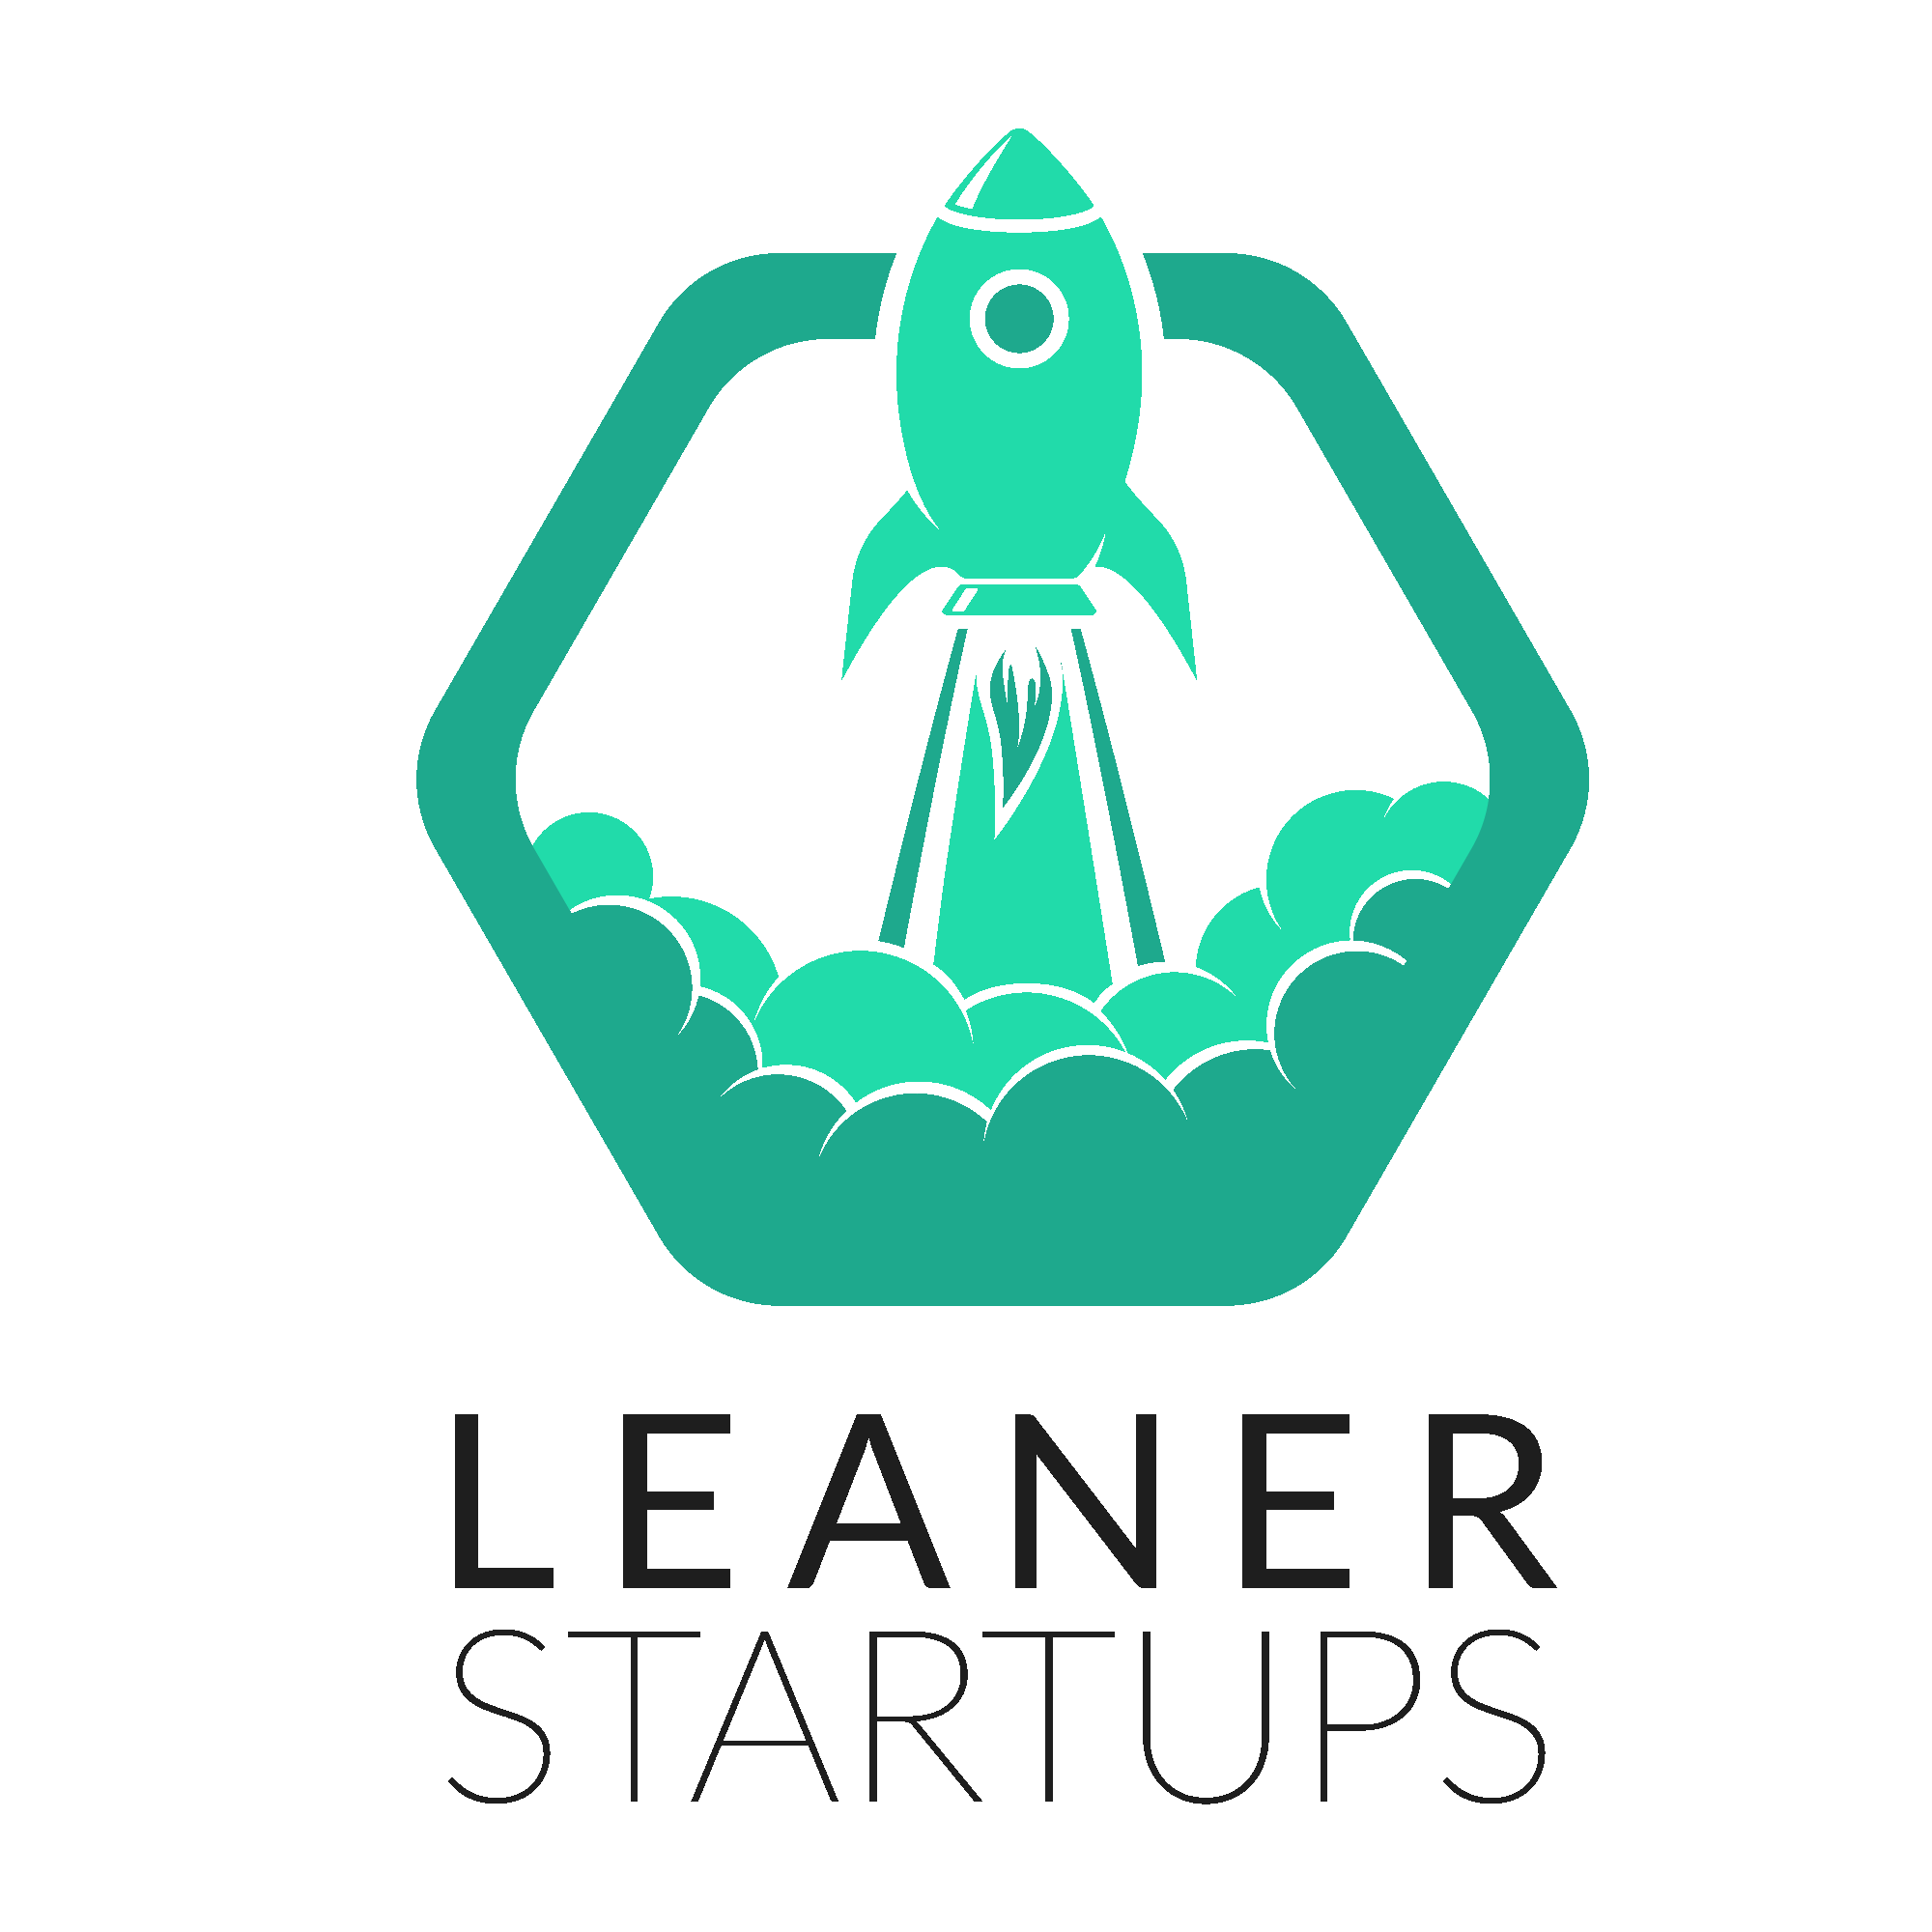 Leaner-Startups-Logo-with-text